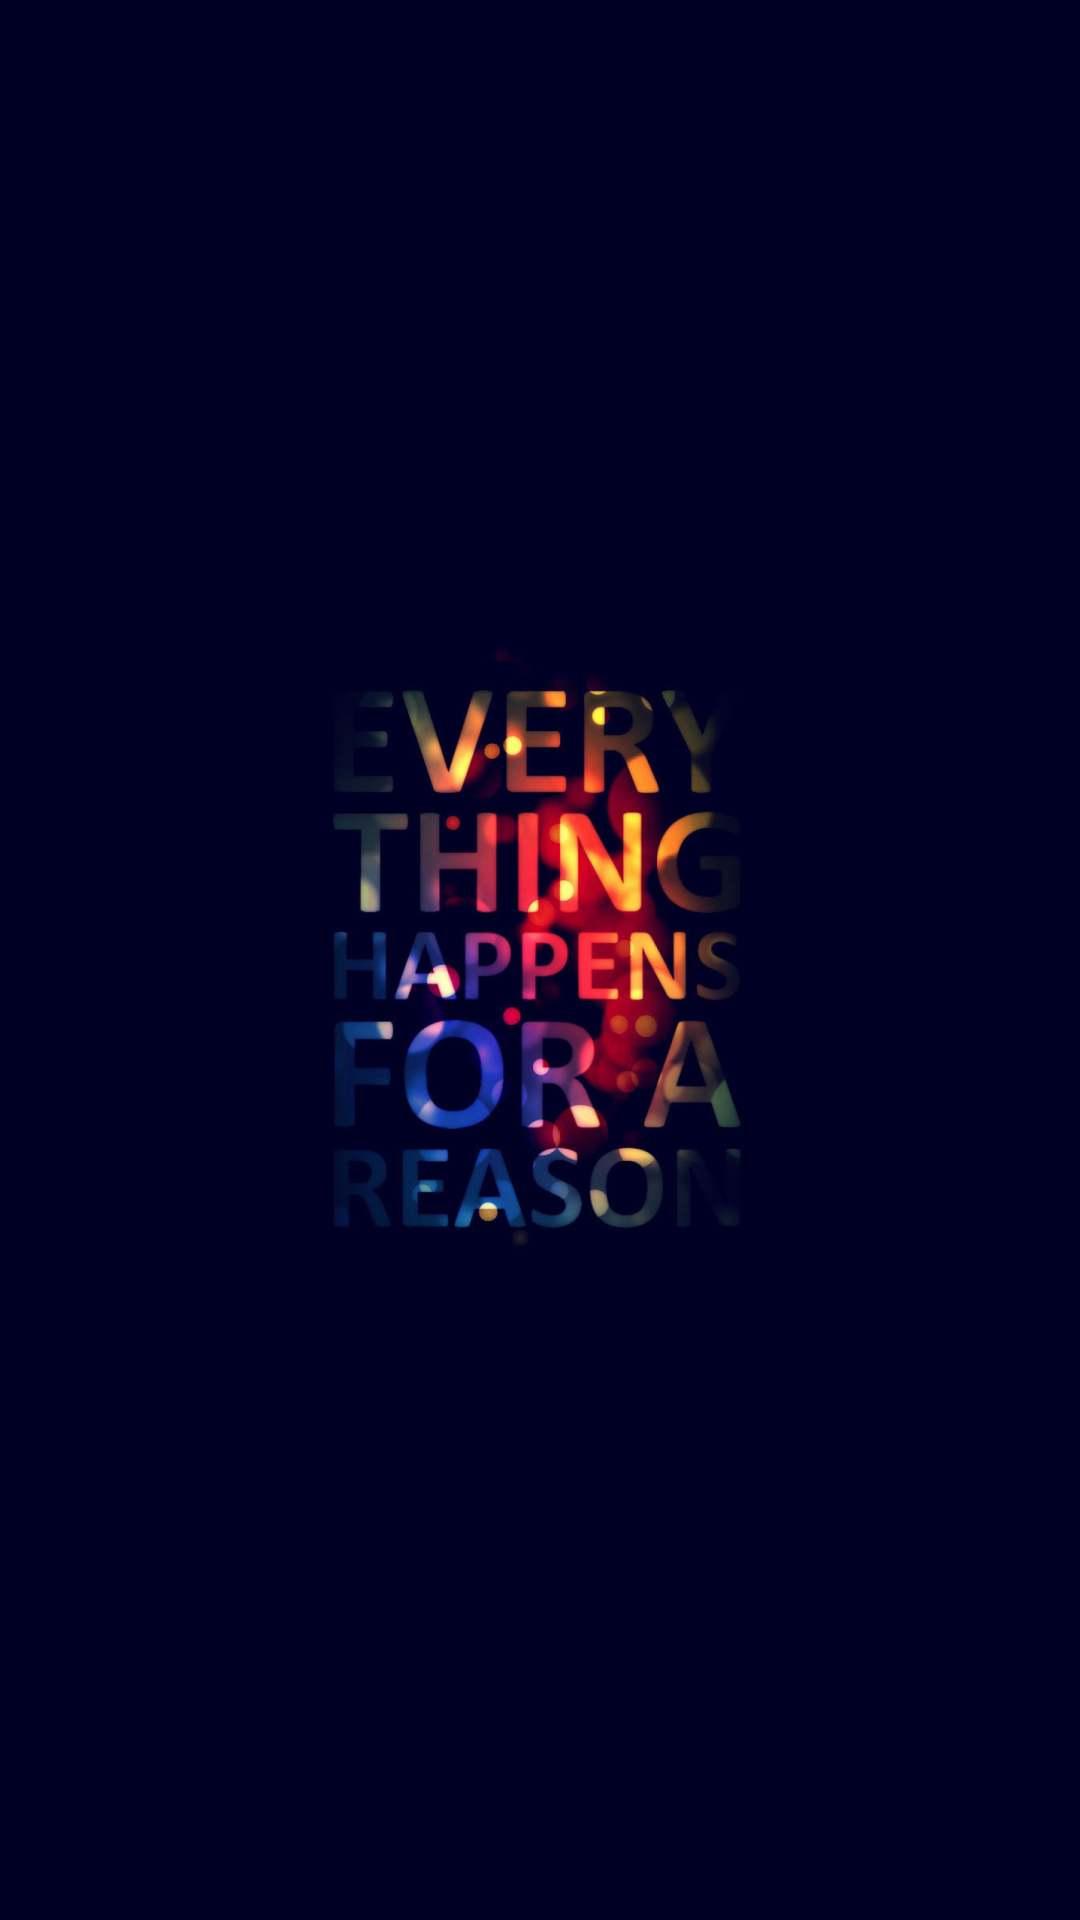 Everything Happens For Reason wallpaper 1080x1920